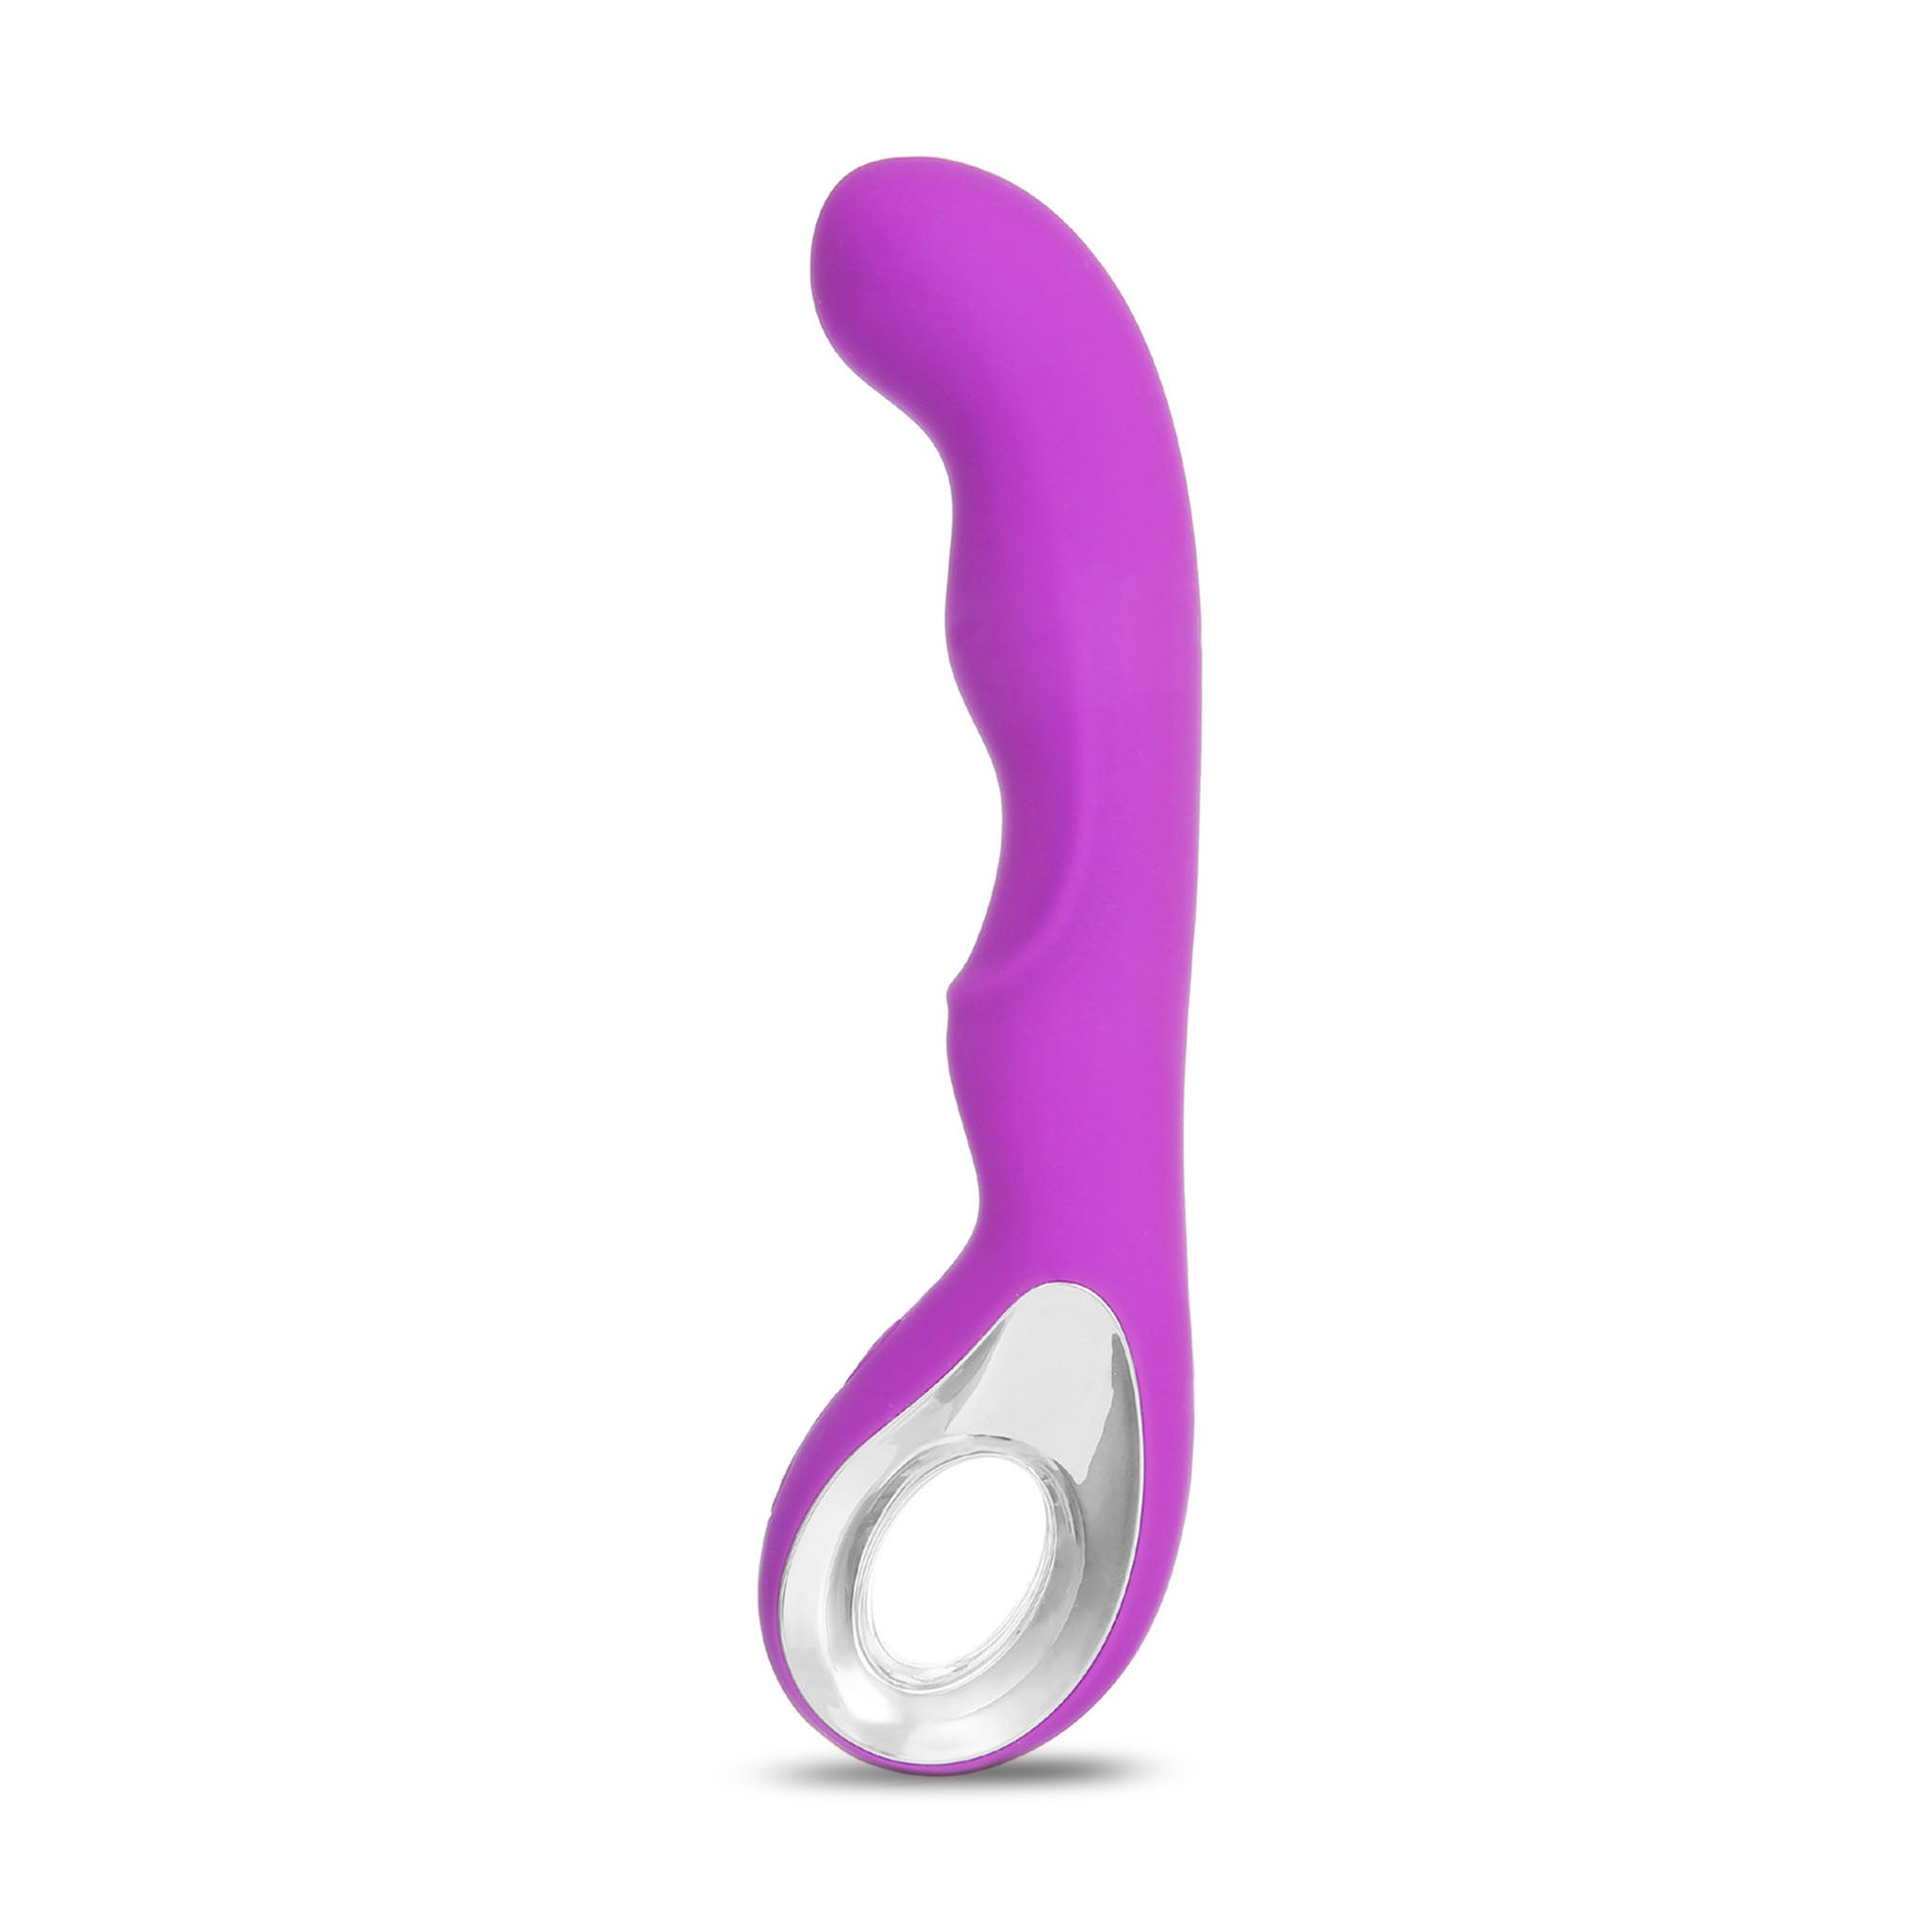 Smooth Silicone Curved G-spot Massager Vibrator Beginner Sex Toys for Women